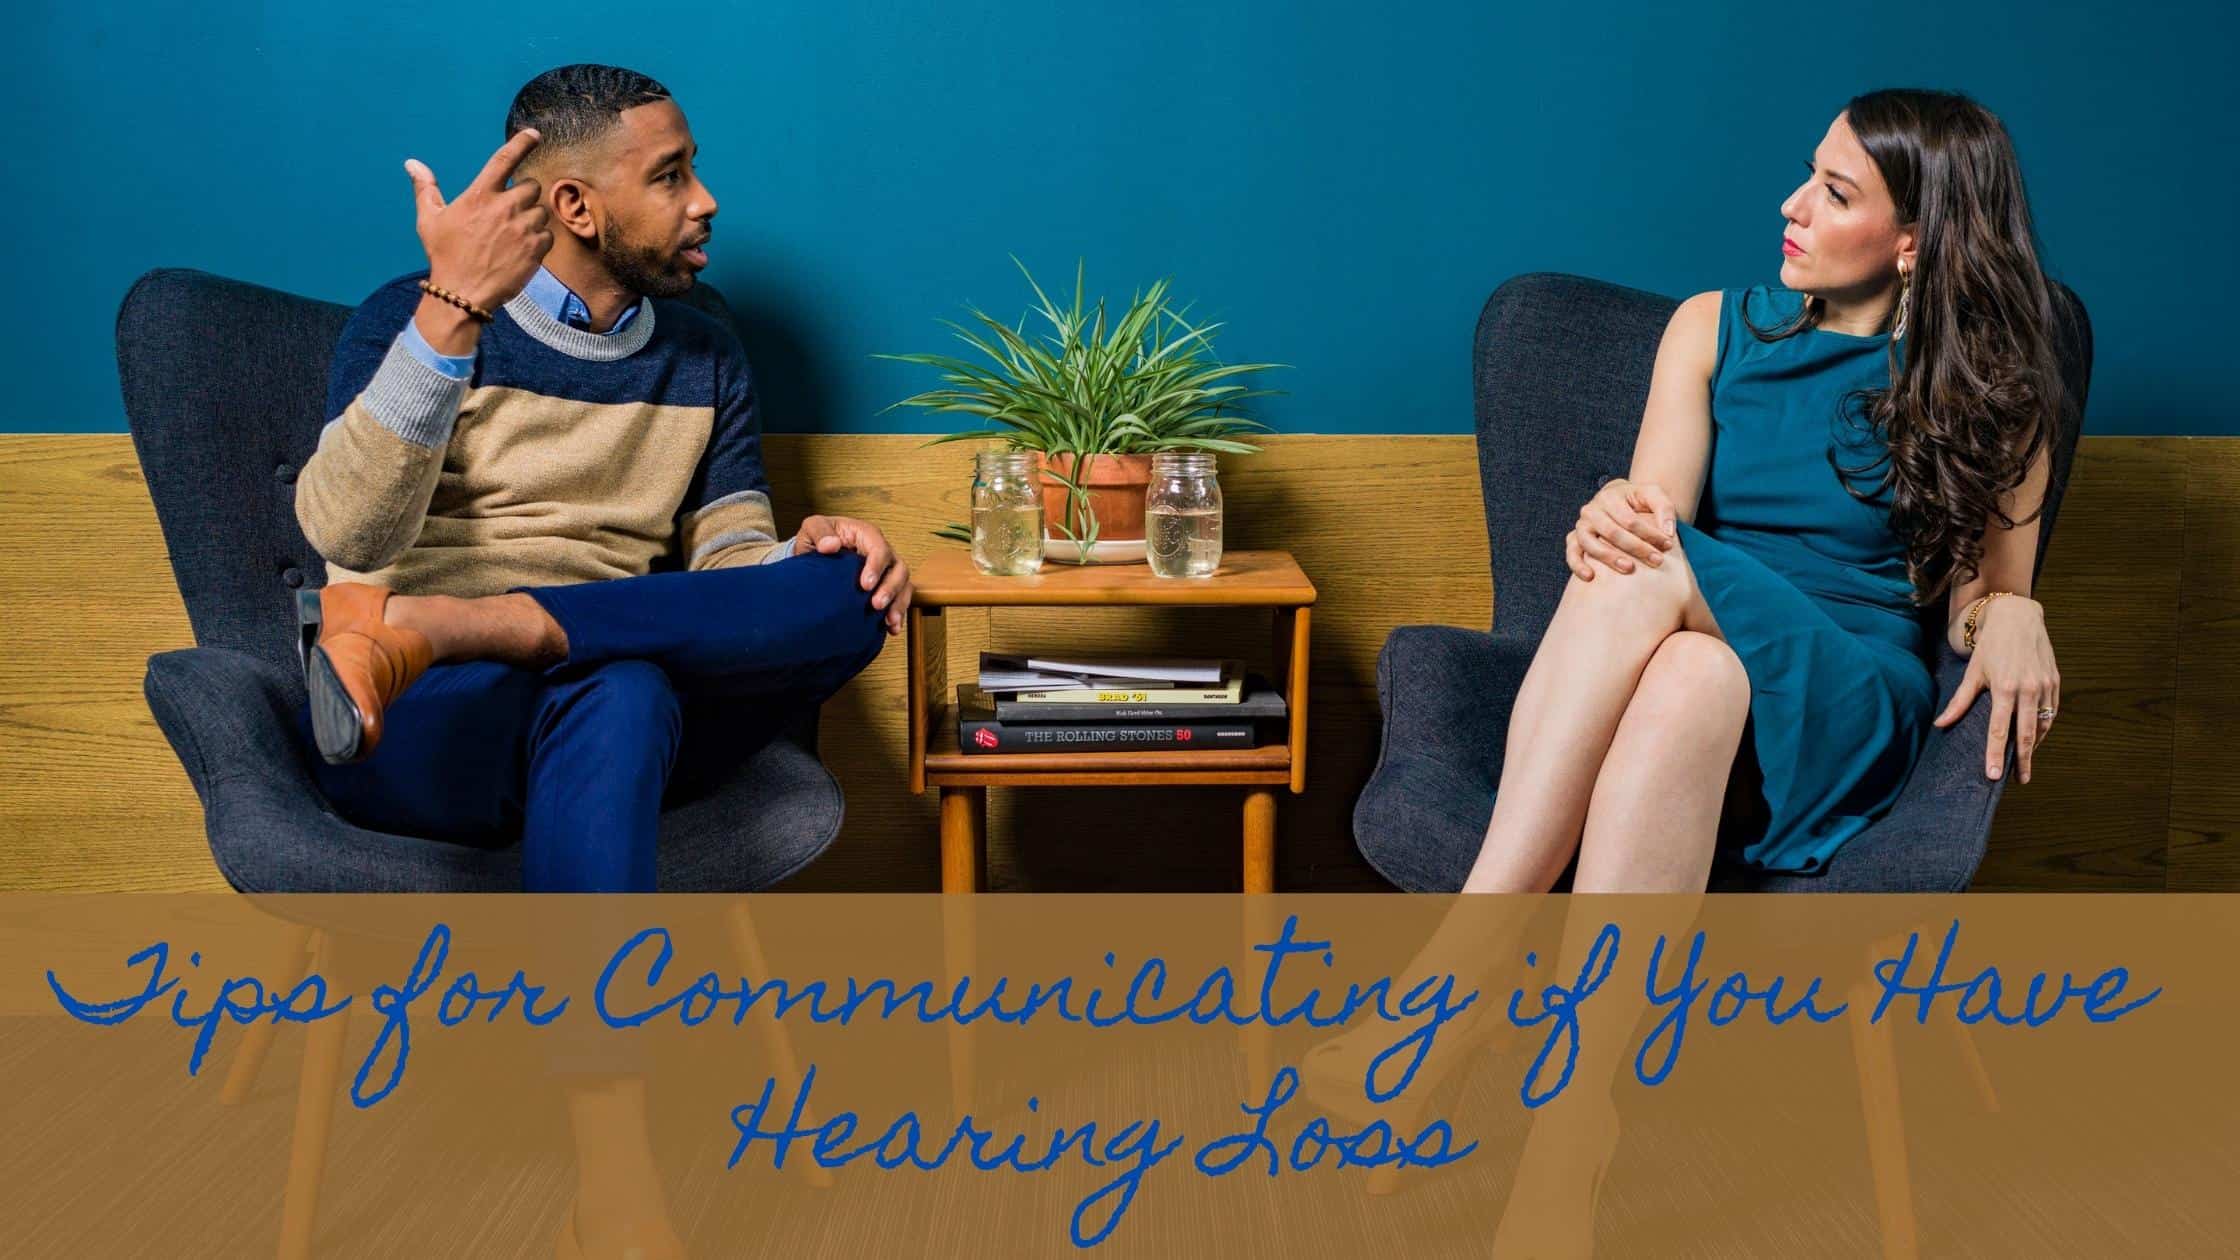 Featured image for “Tips for Communicating if You Have Hearing Loss”